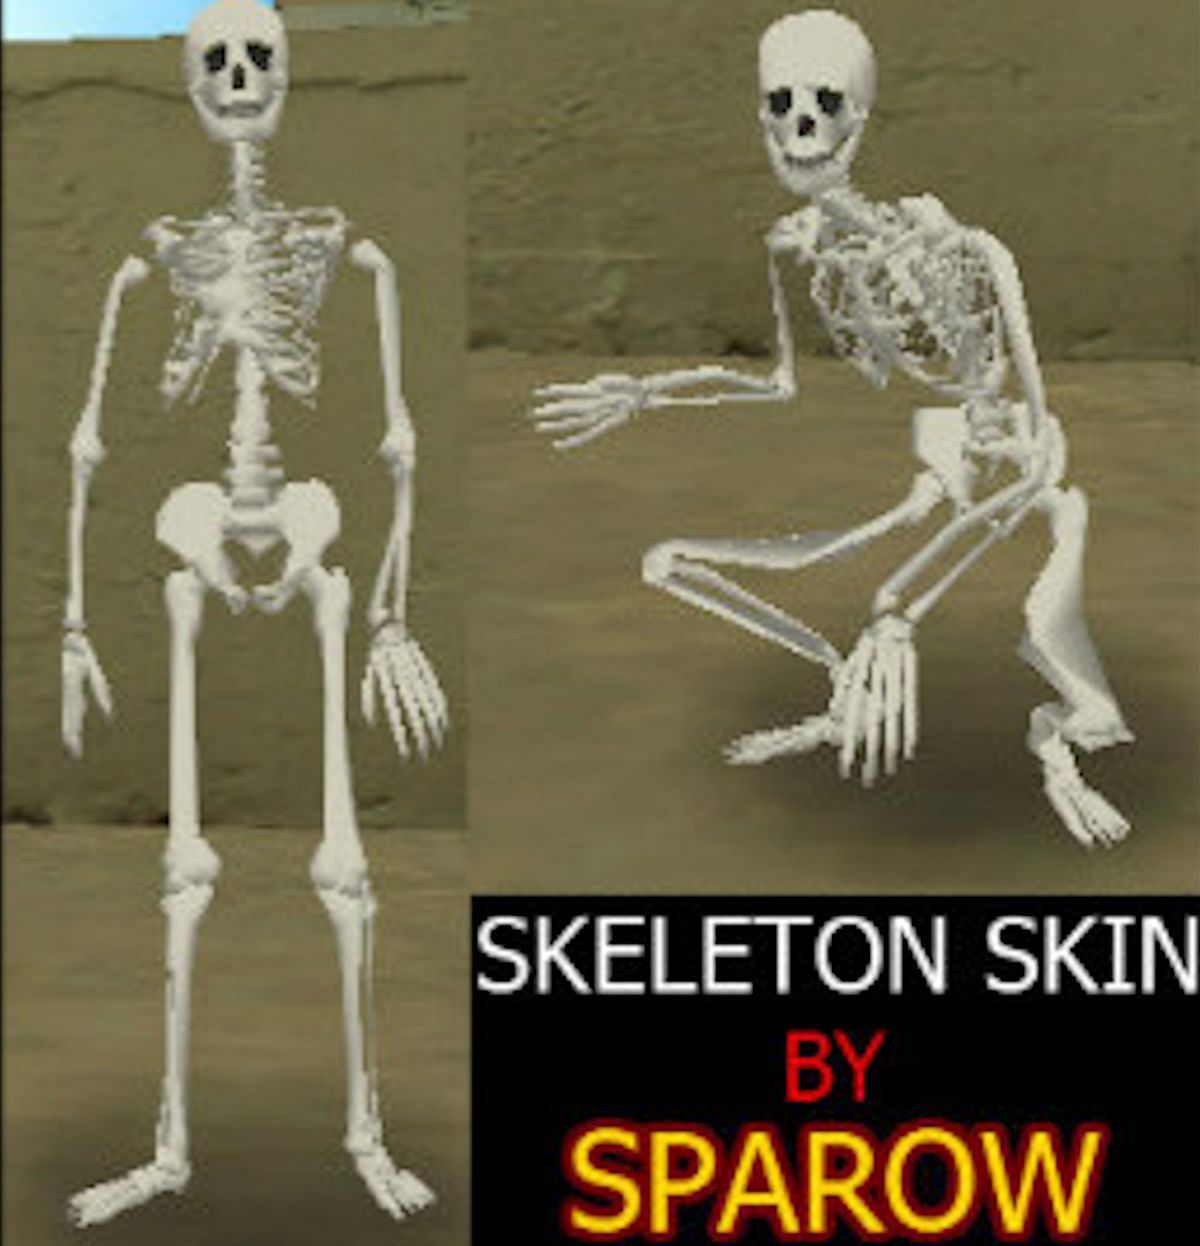 Skeletons are often associated with Halloween (Image via Sparow)